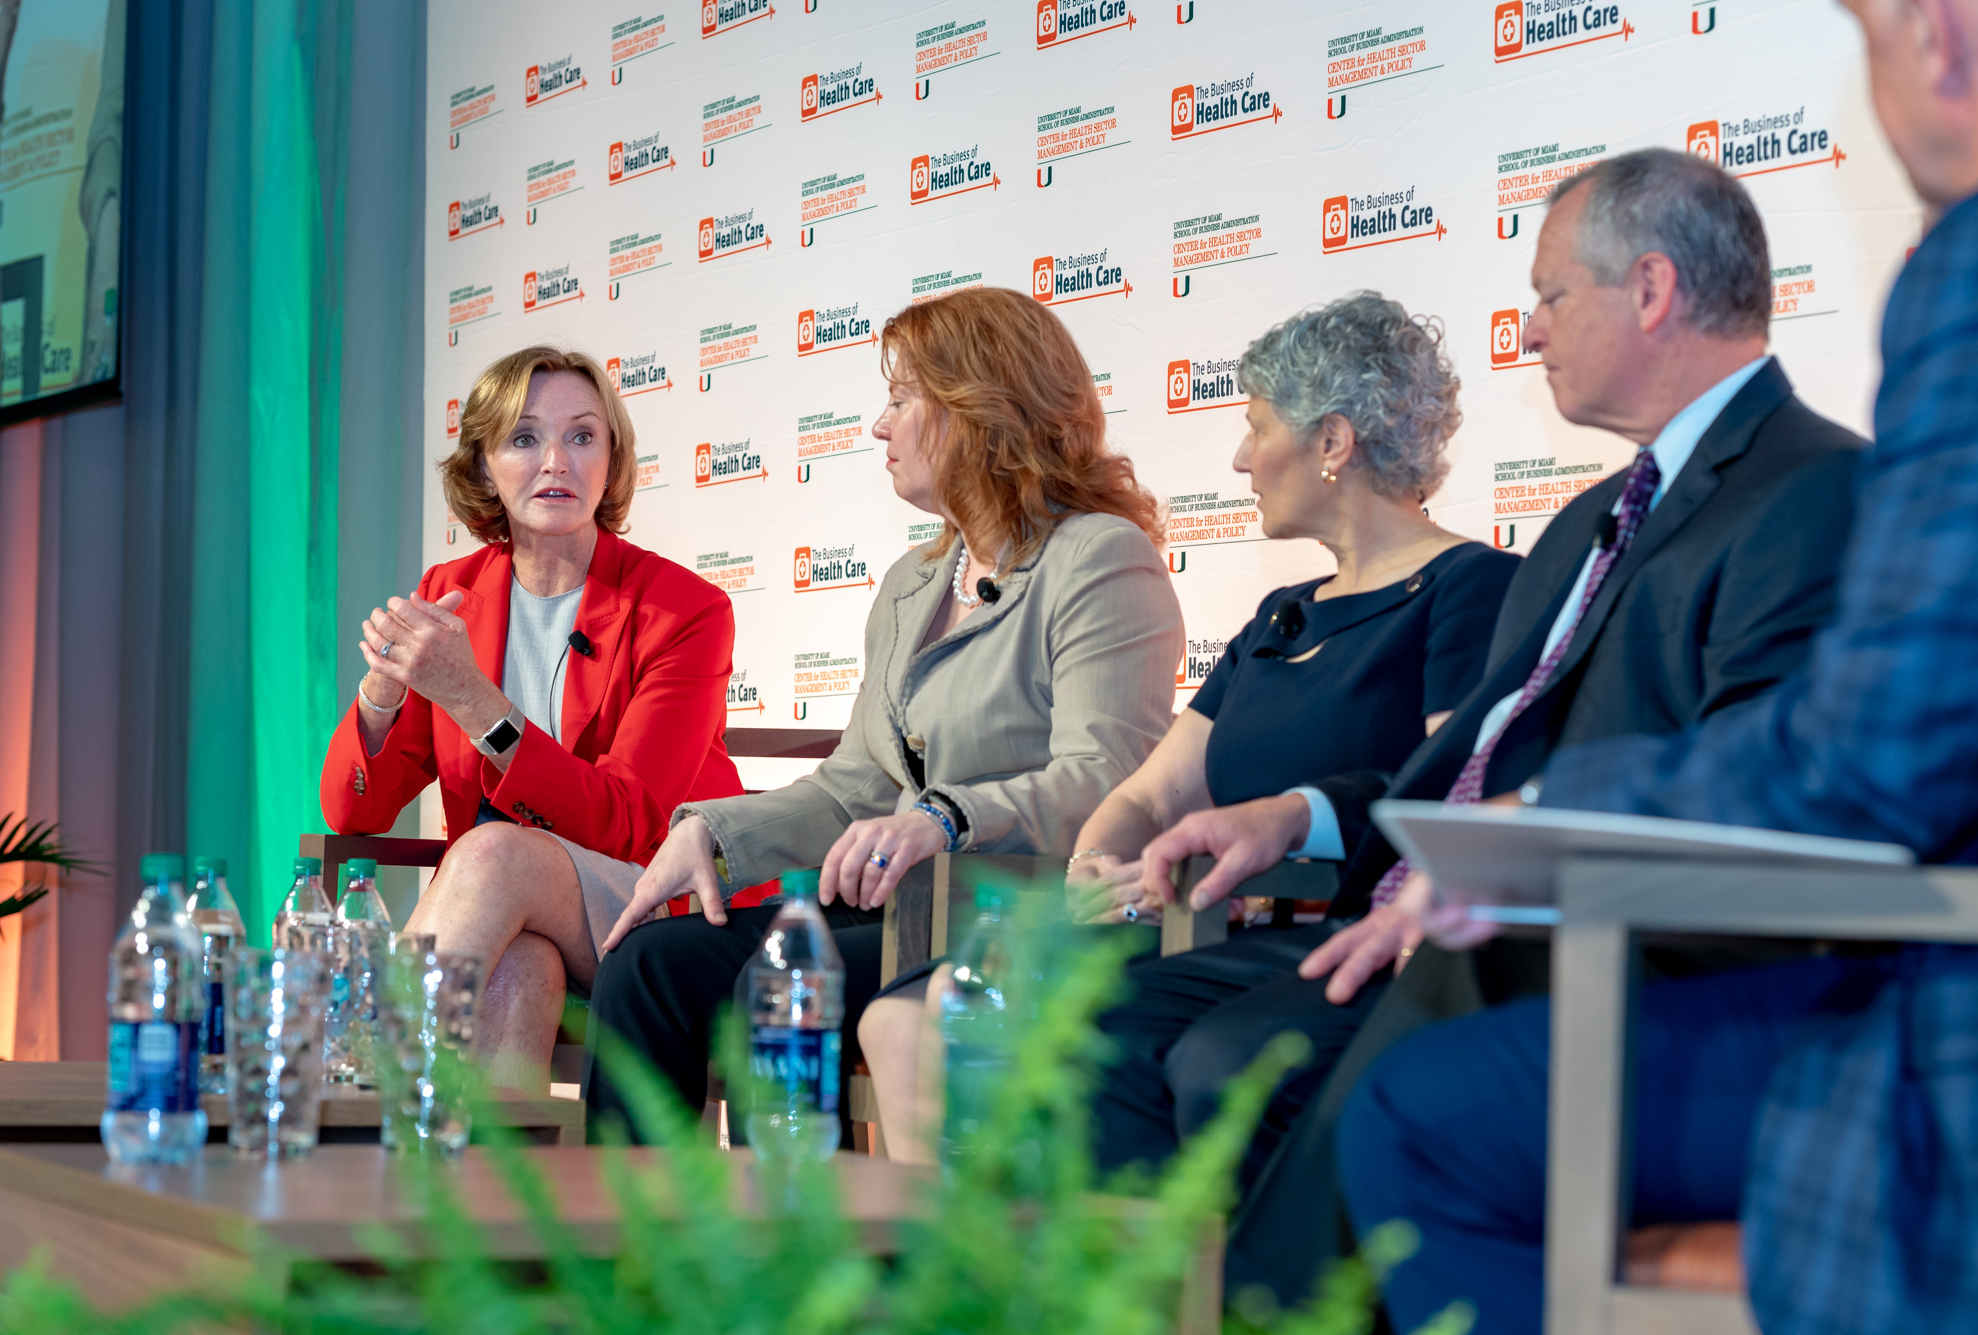 A panel of people speaking at an event.